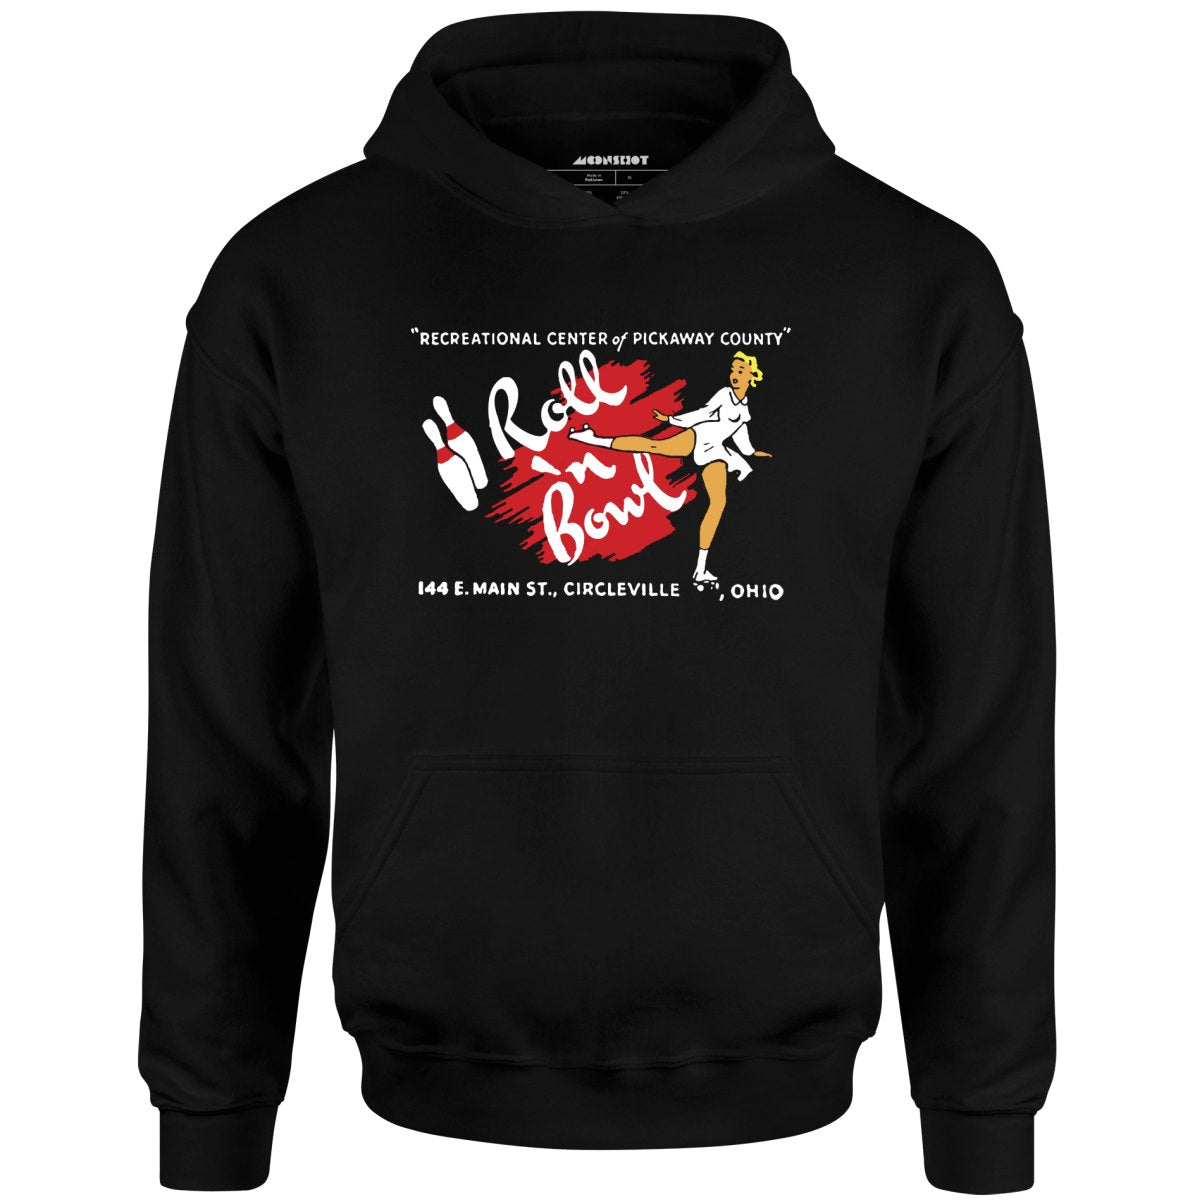 Roll 'n Bowl - Circleville, OH - Vintage Bowling Alley - Unisex Hoodie